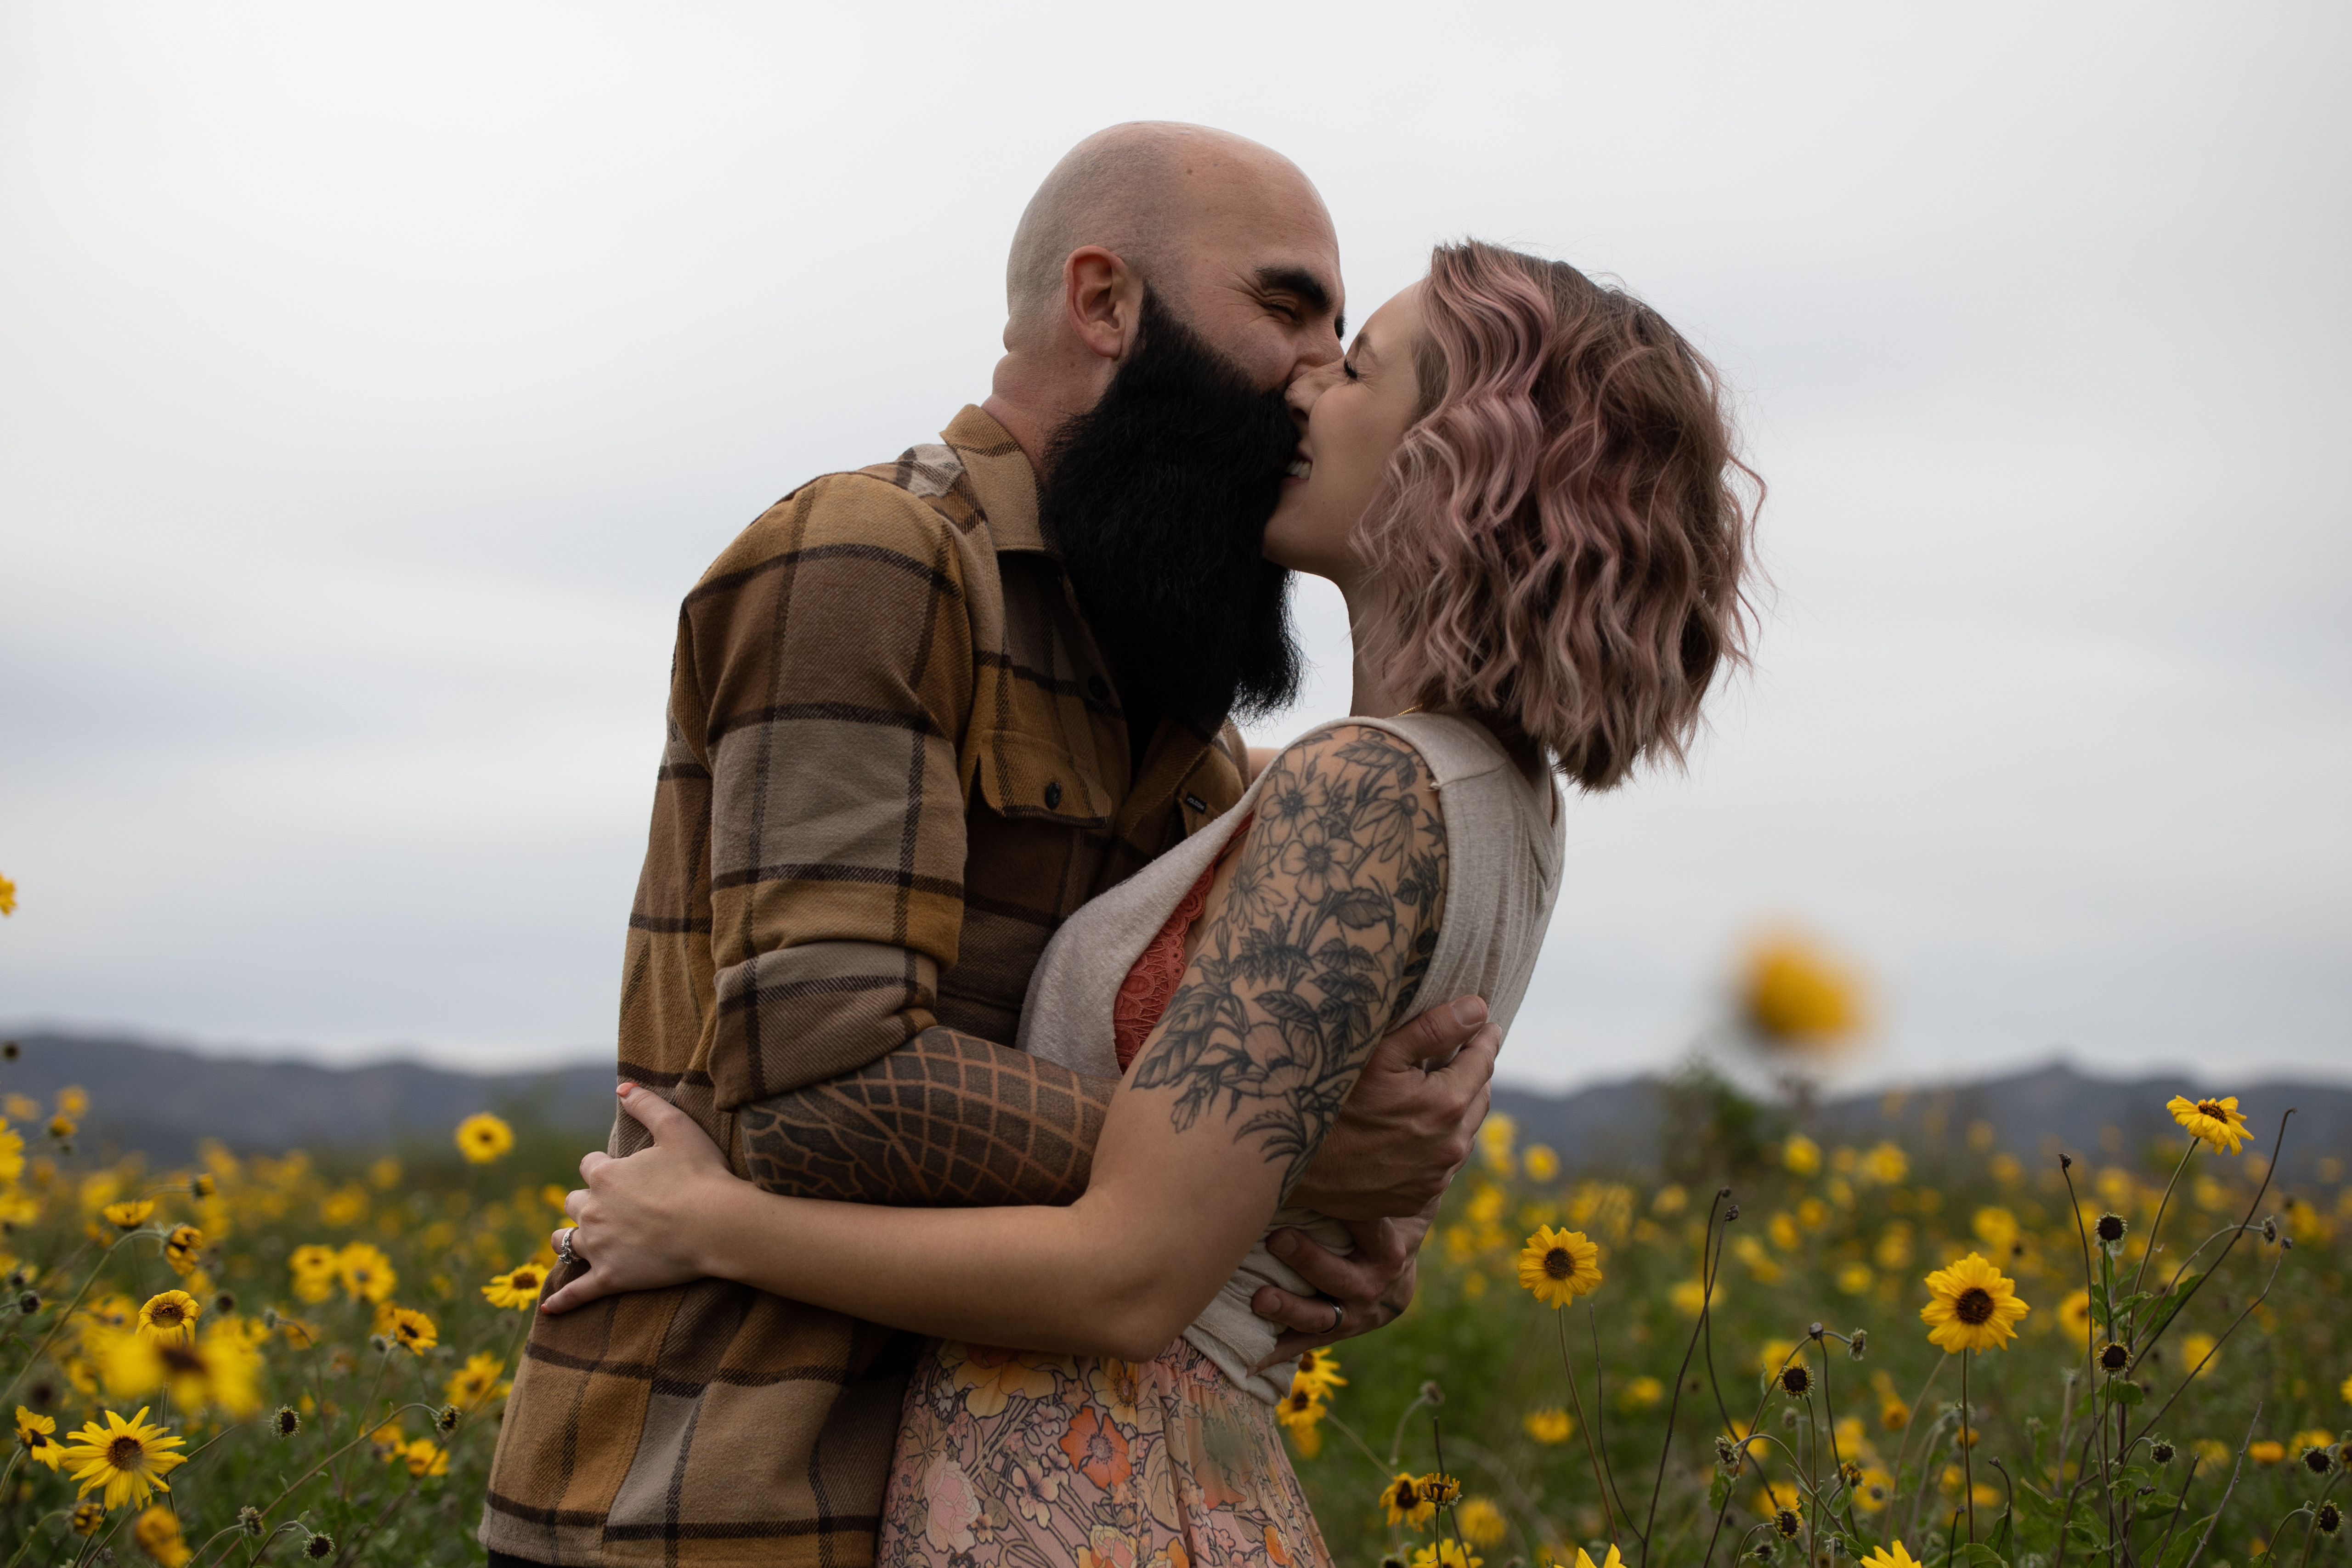 Husband and wife couple laughing and kissing with tattoos and beard and pink hair in yellow daisy field